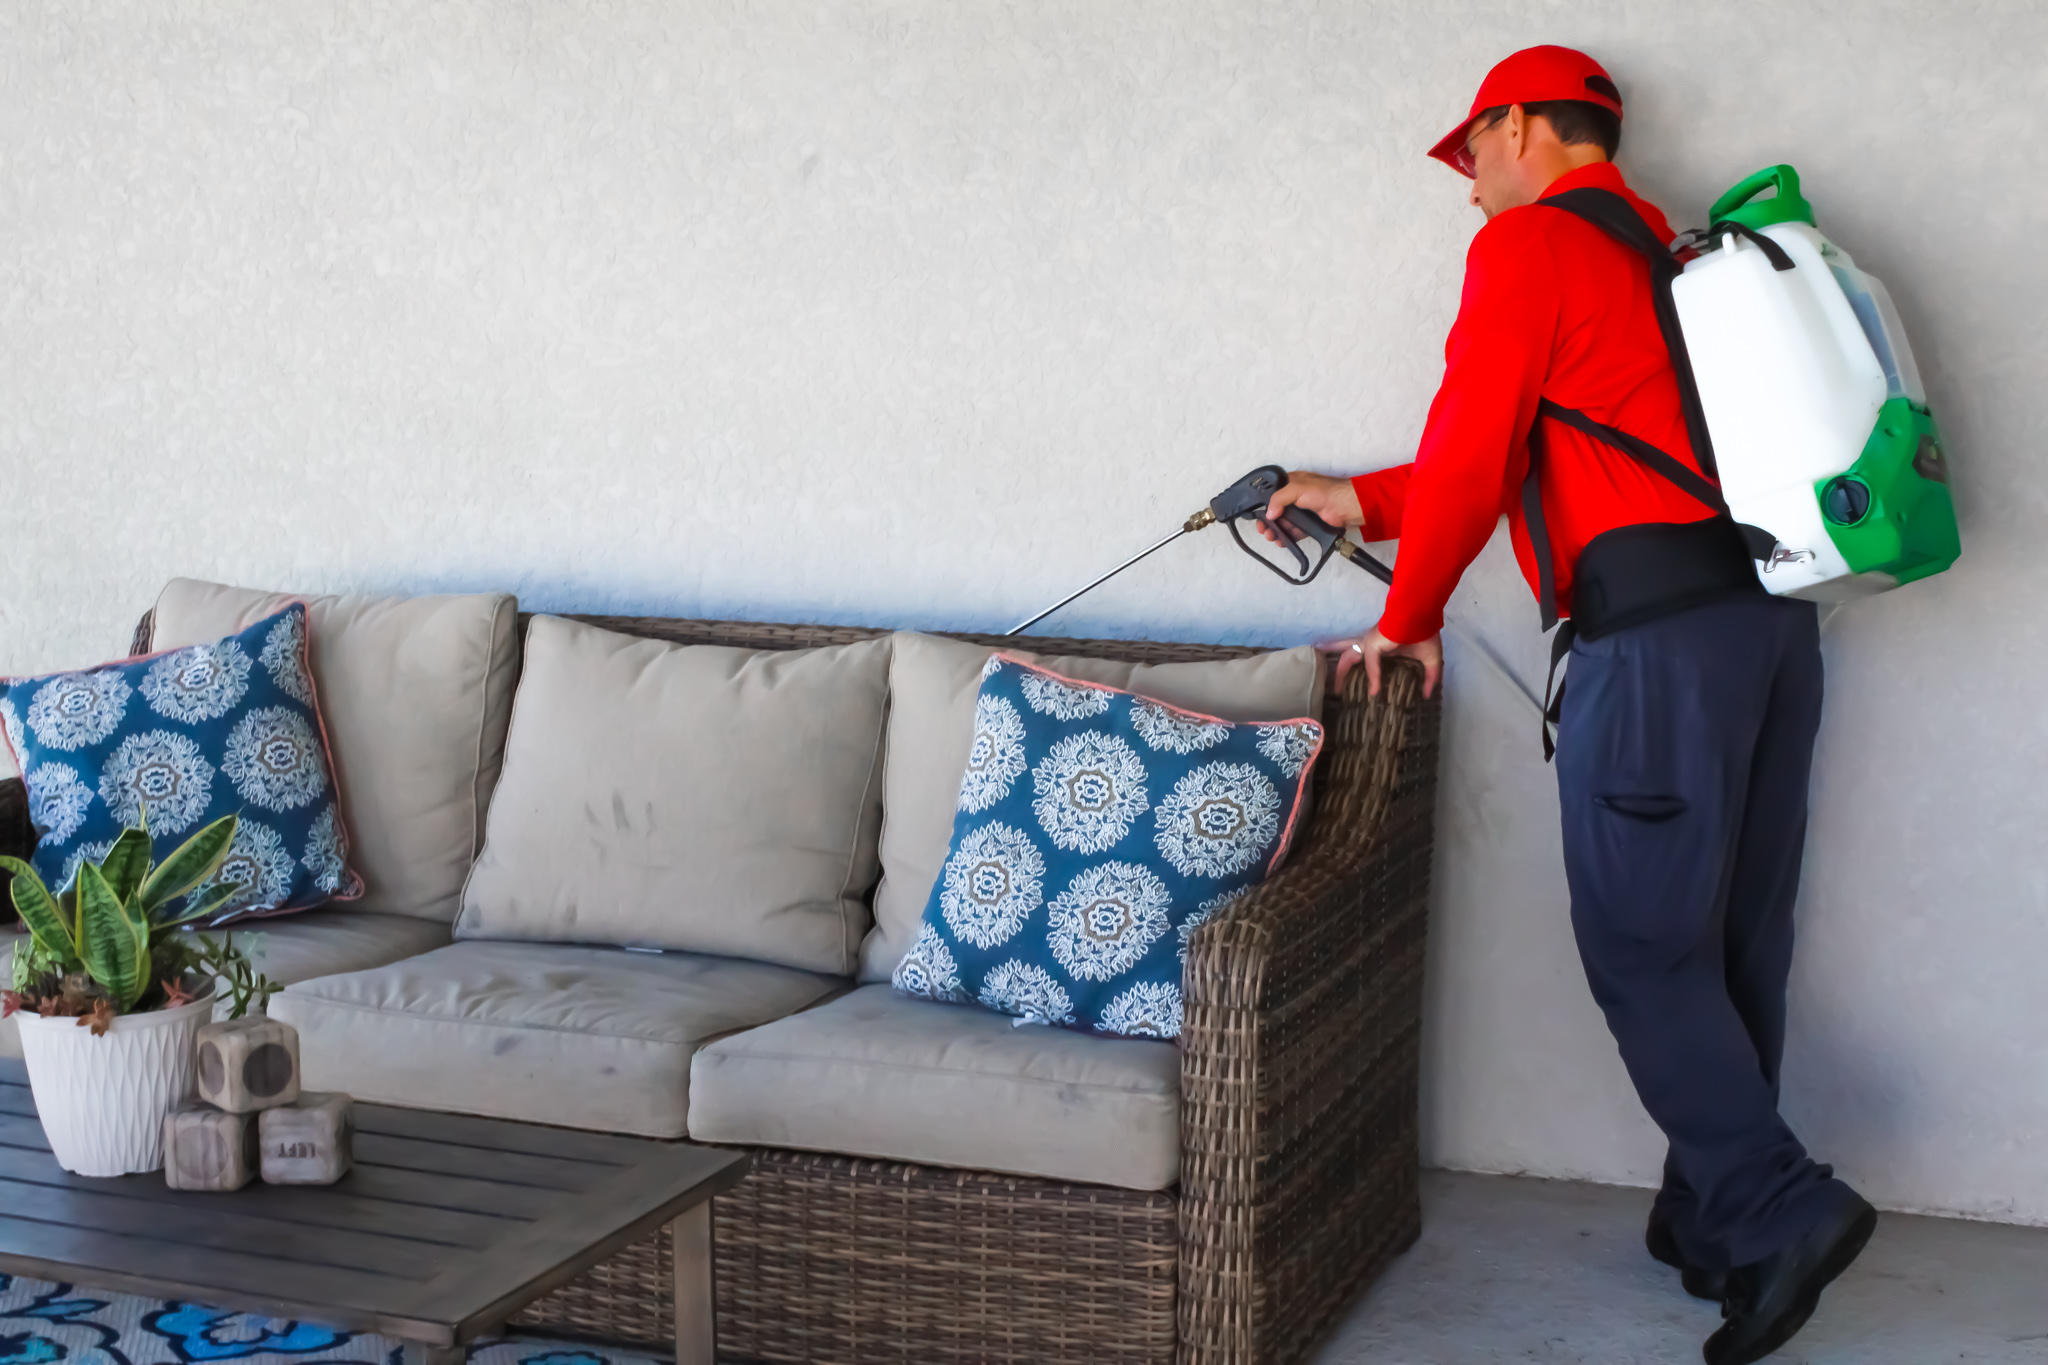 Our highly trained and experienced technicians specialize in determining your pest issues, all while providing a child and pet-friendly solution to protect both your property and family.